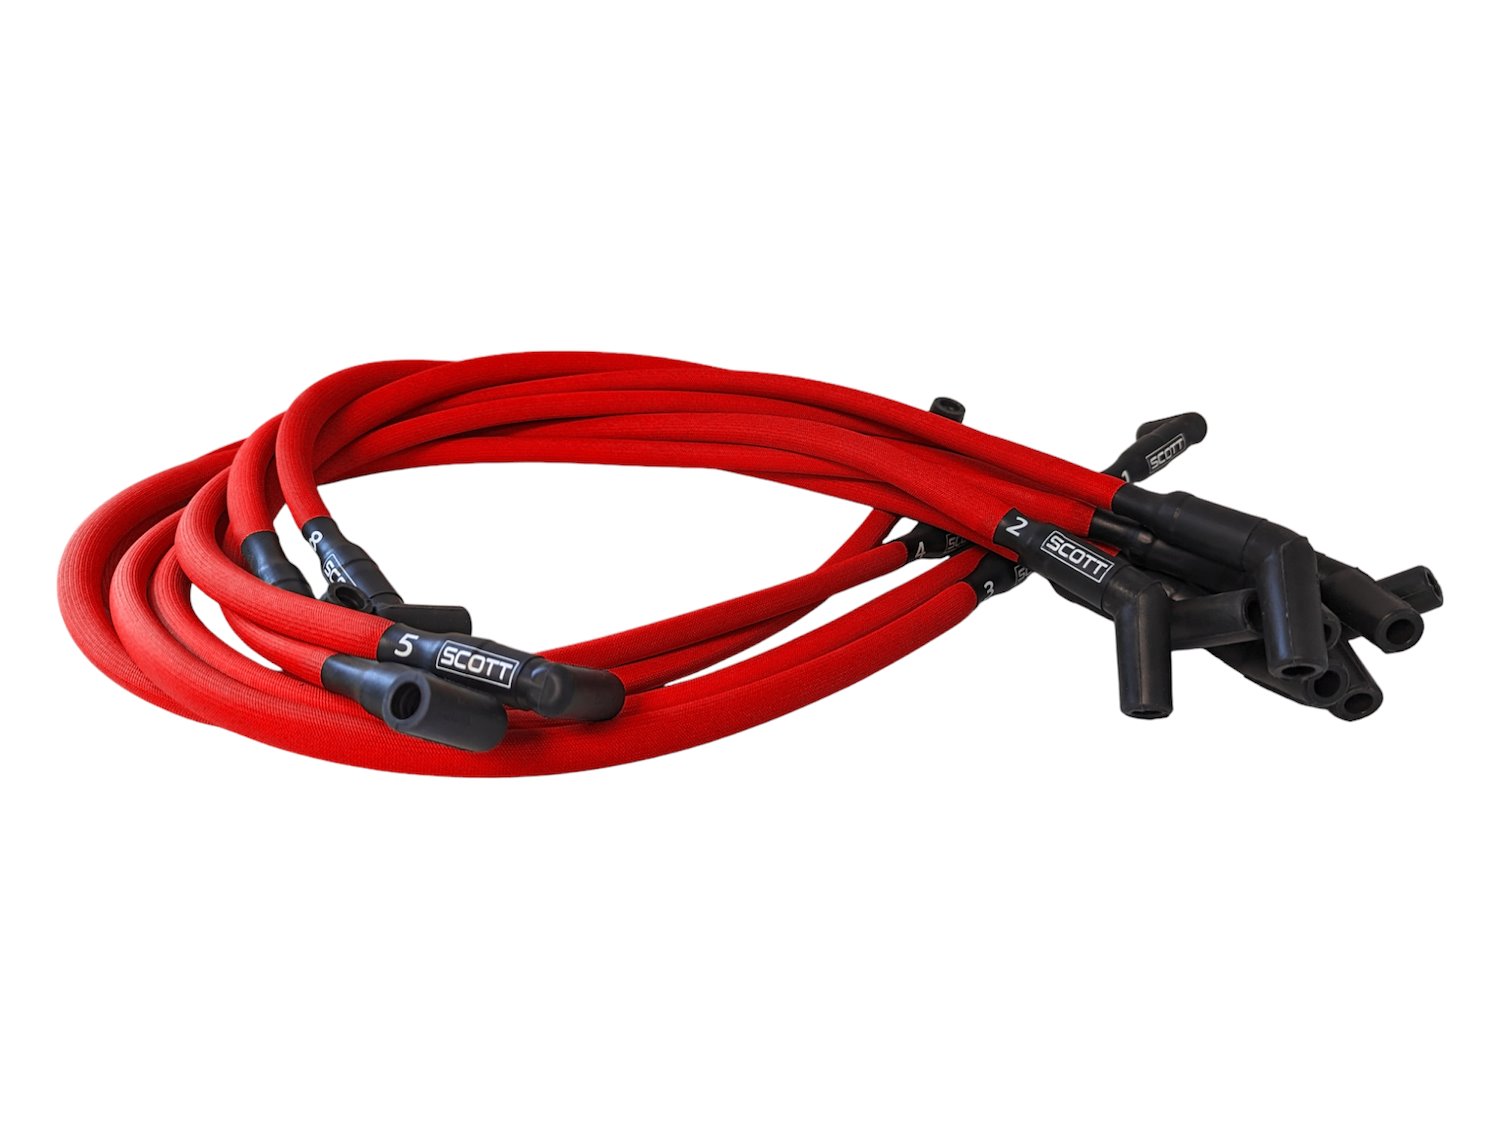 SPW300-PS-429-2 Super Mag Fiberglass-Oversleeved Spark Plug Wire Set for Big Block Ford, Over Valve Cover [Red]